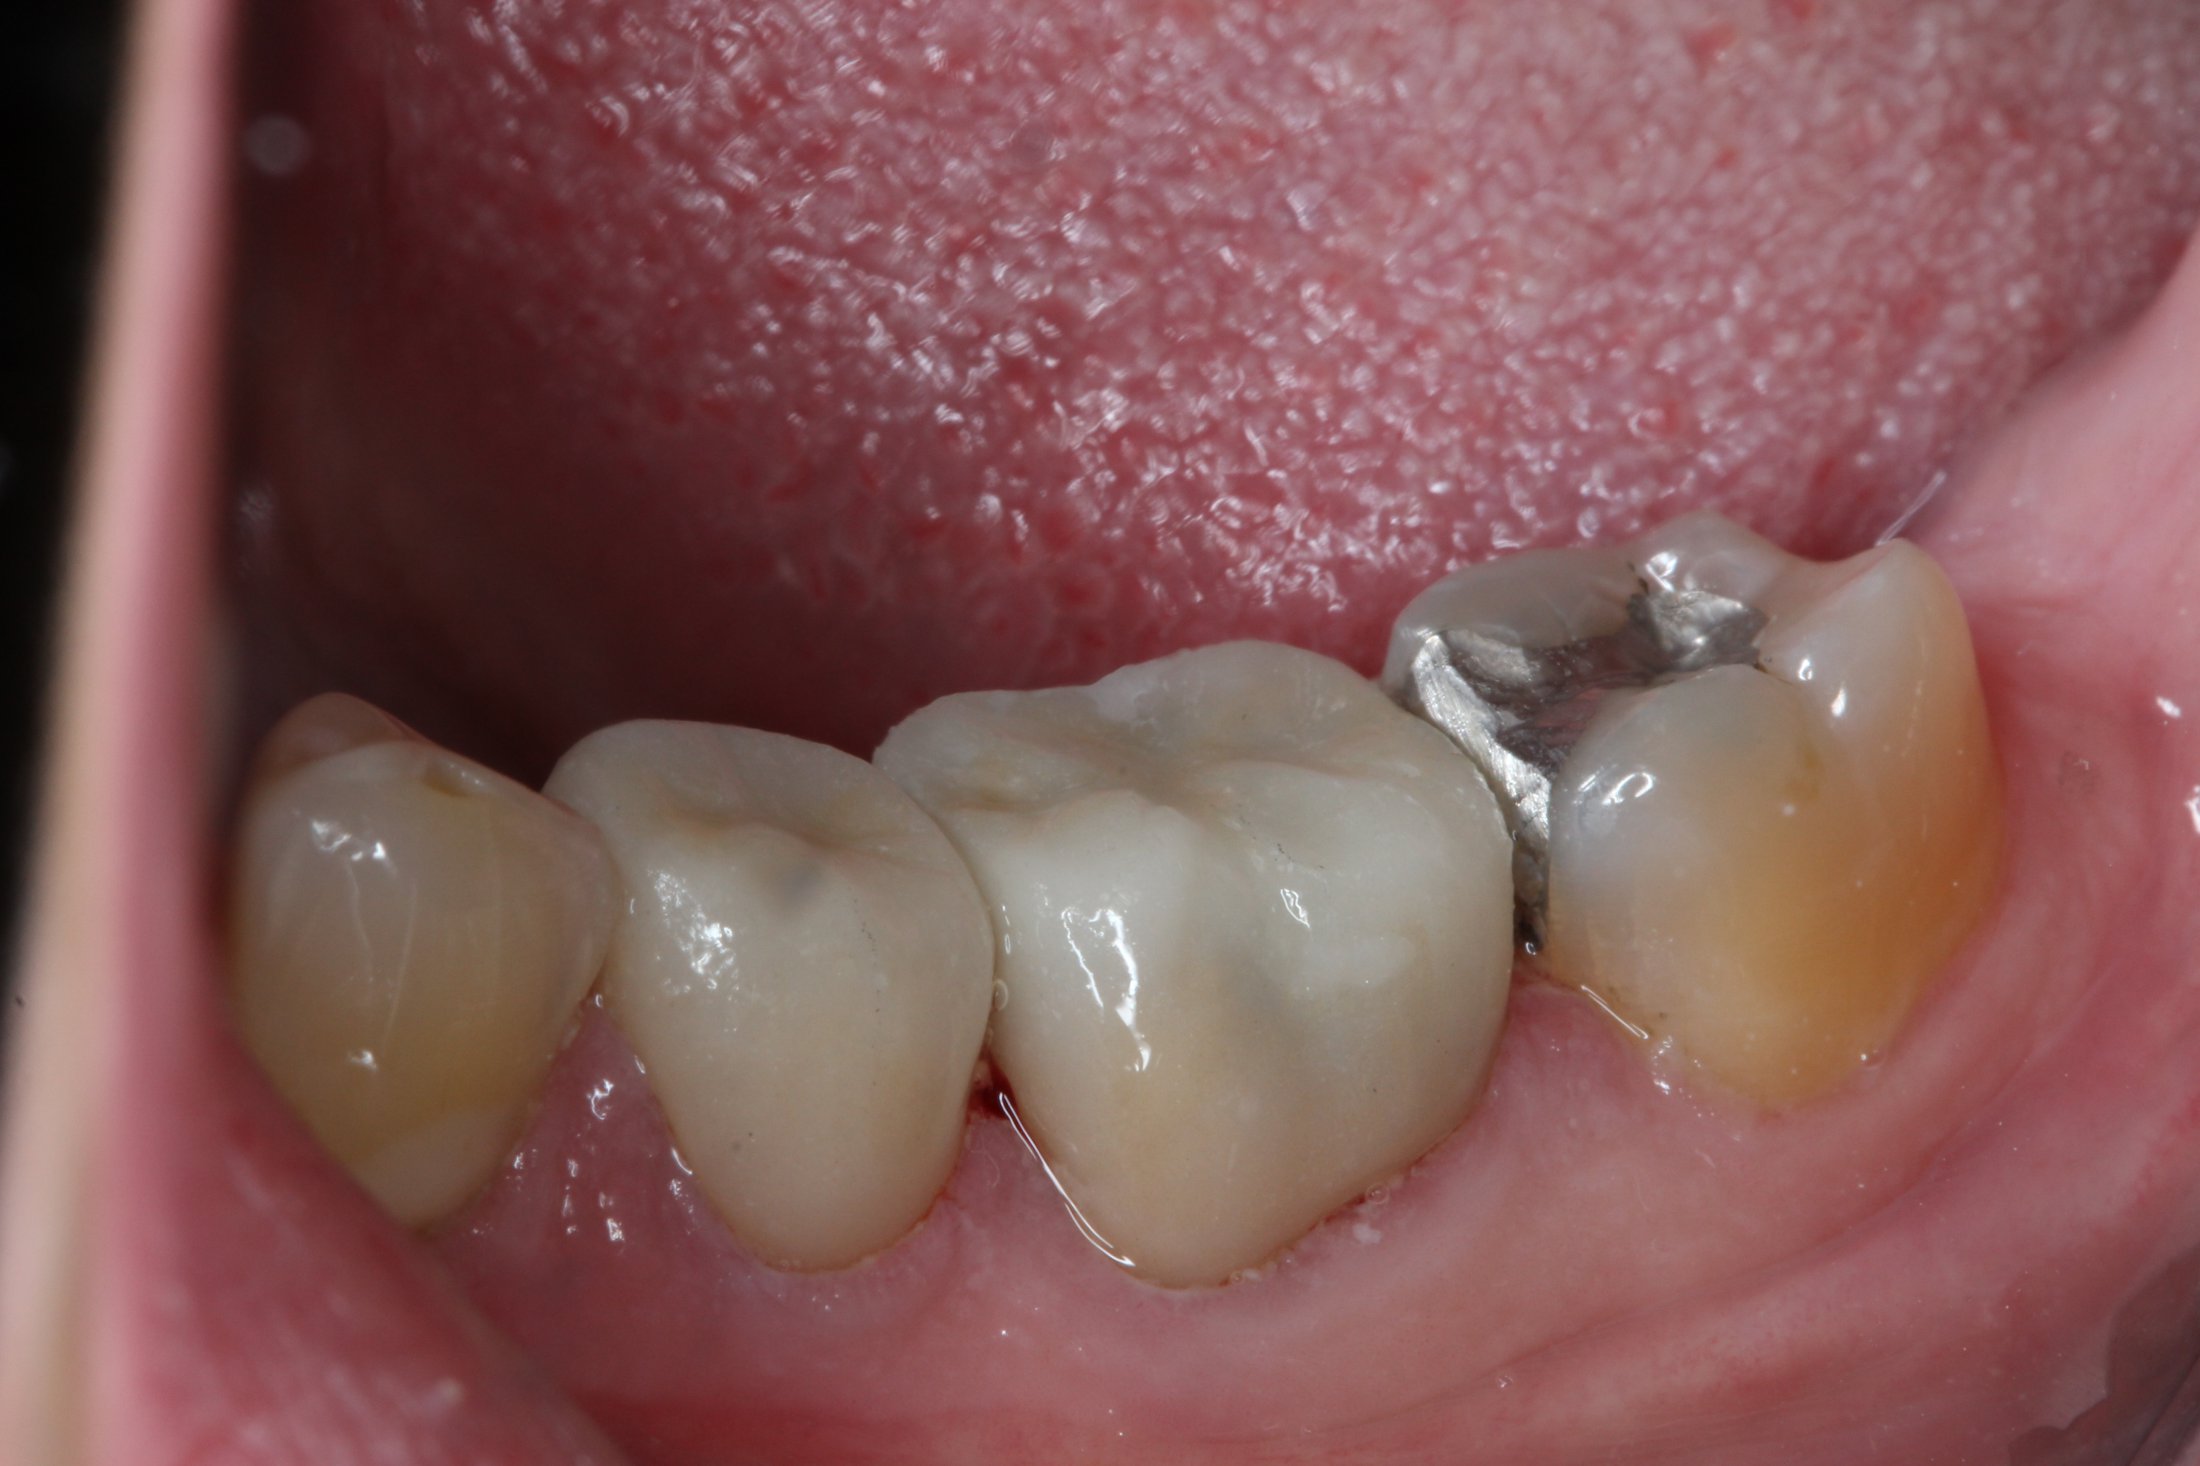 Patient's mouth after dental treatment